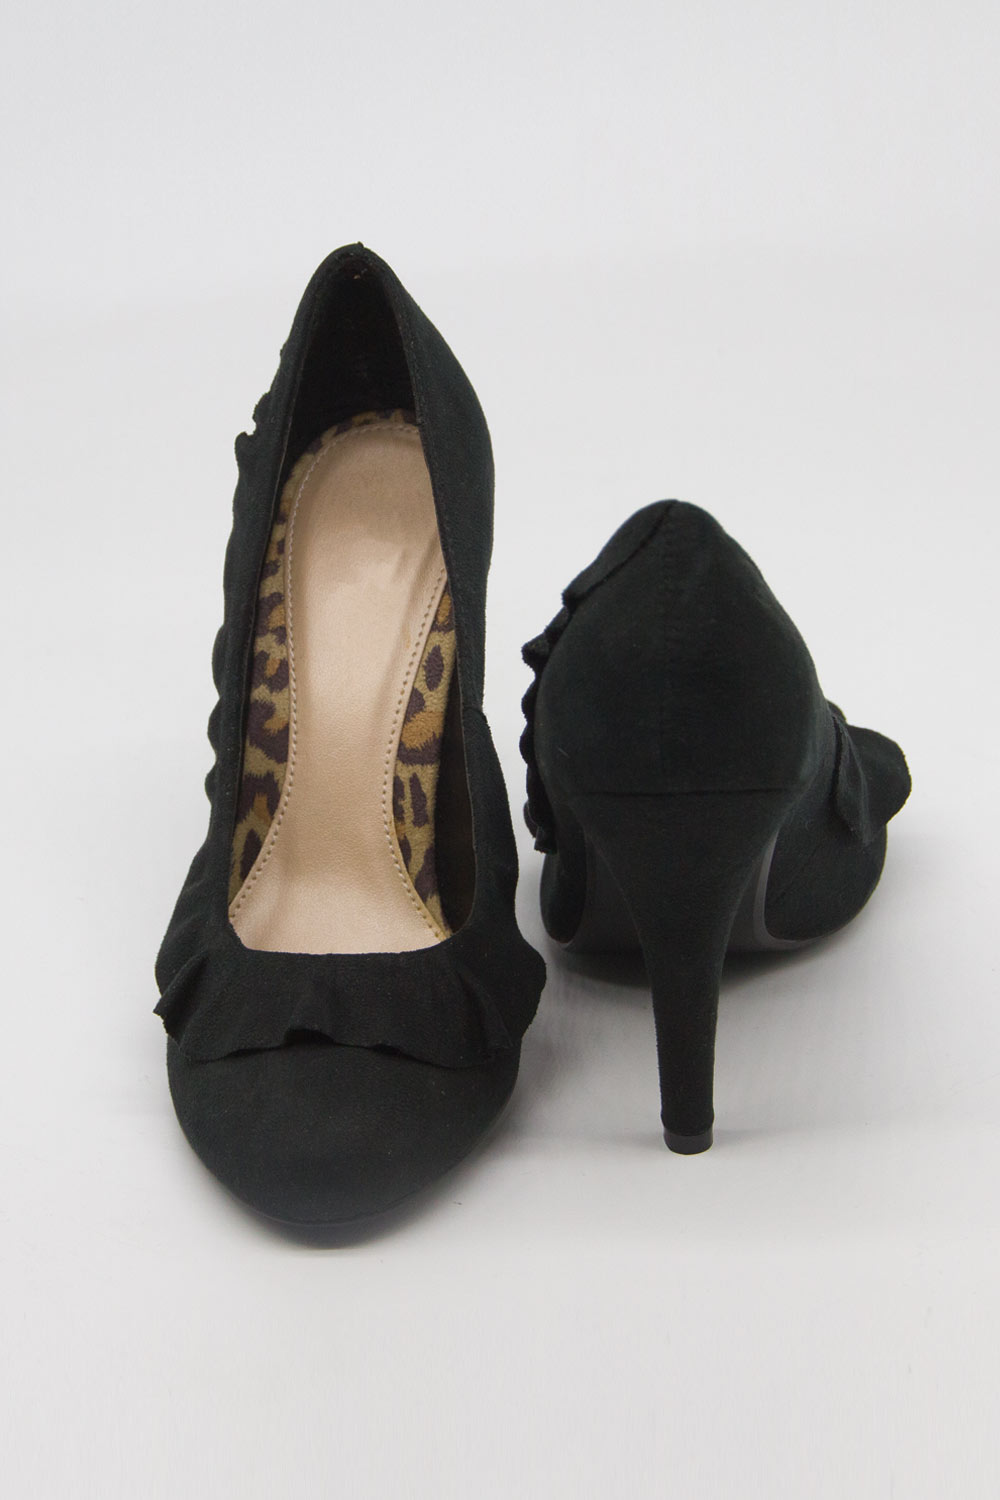 Frill Detailed Heeled Shoes (Black)